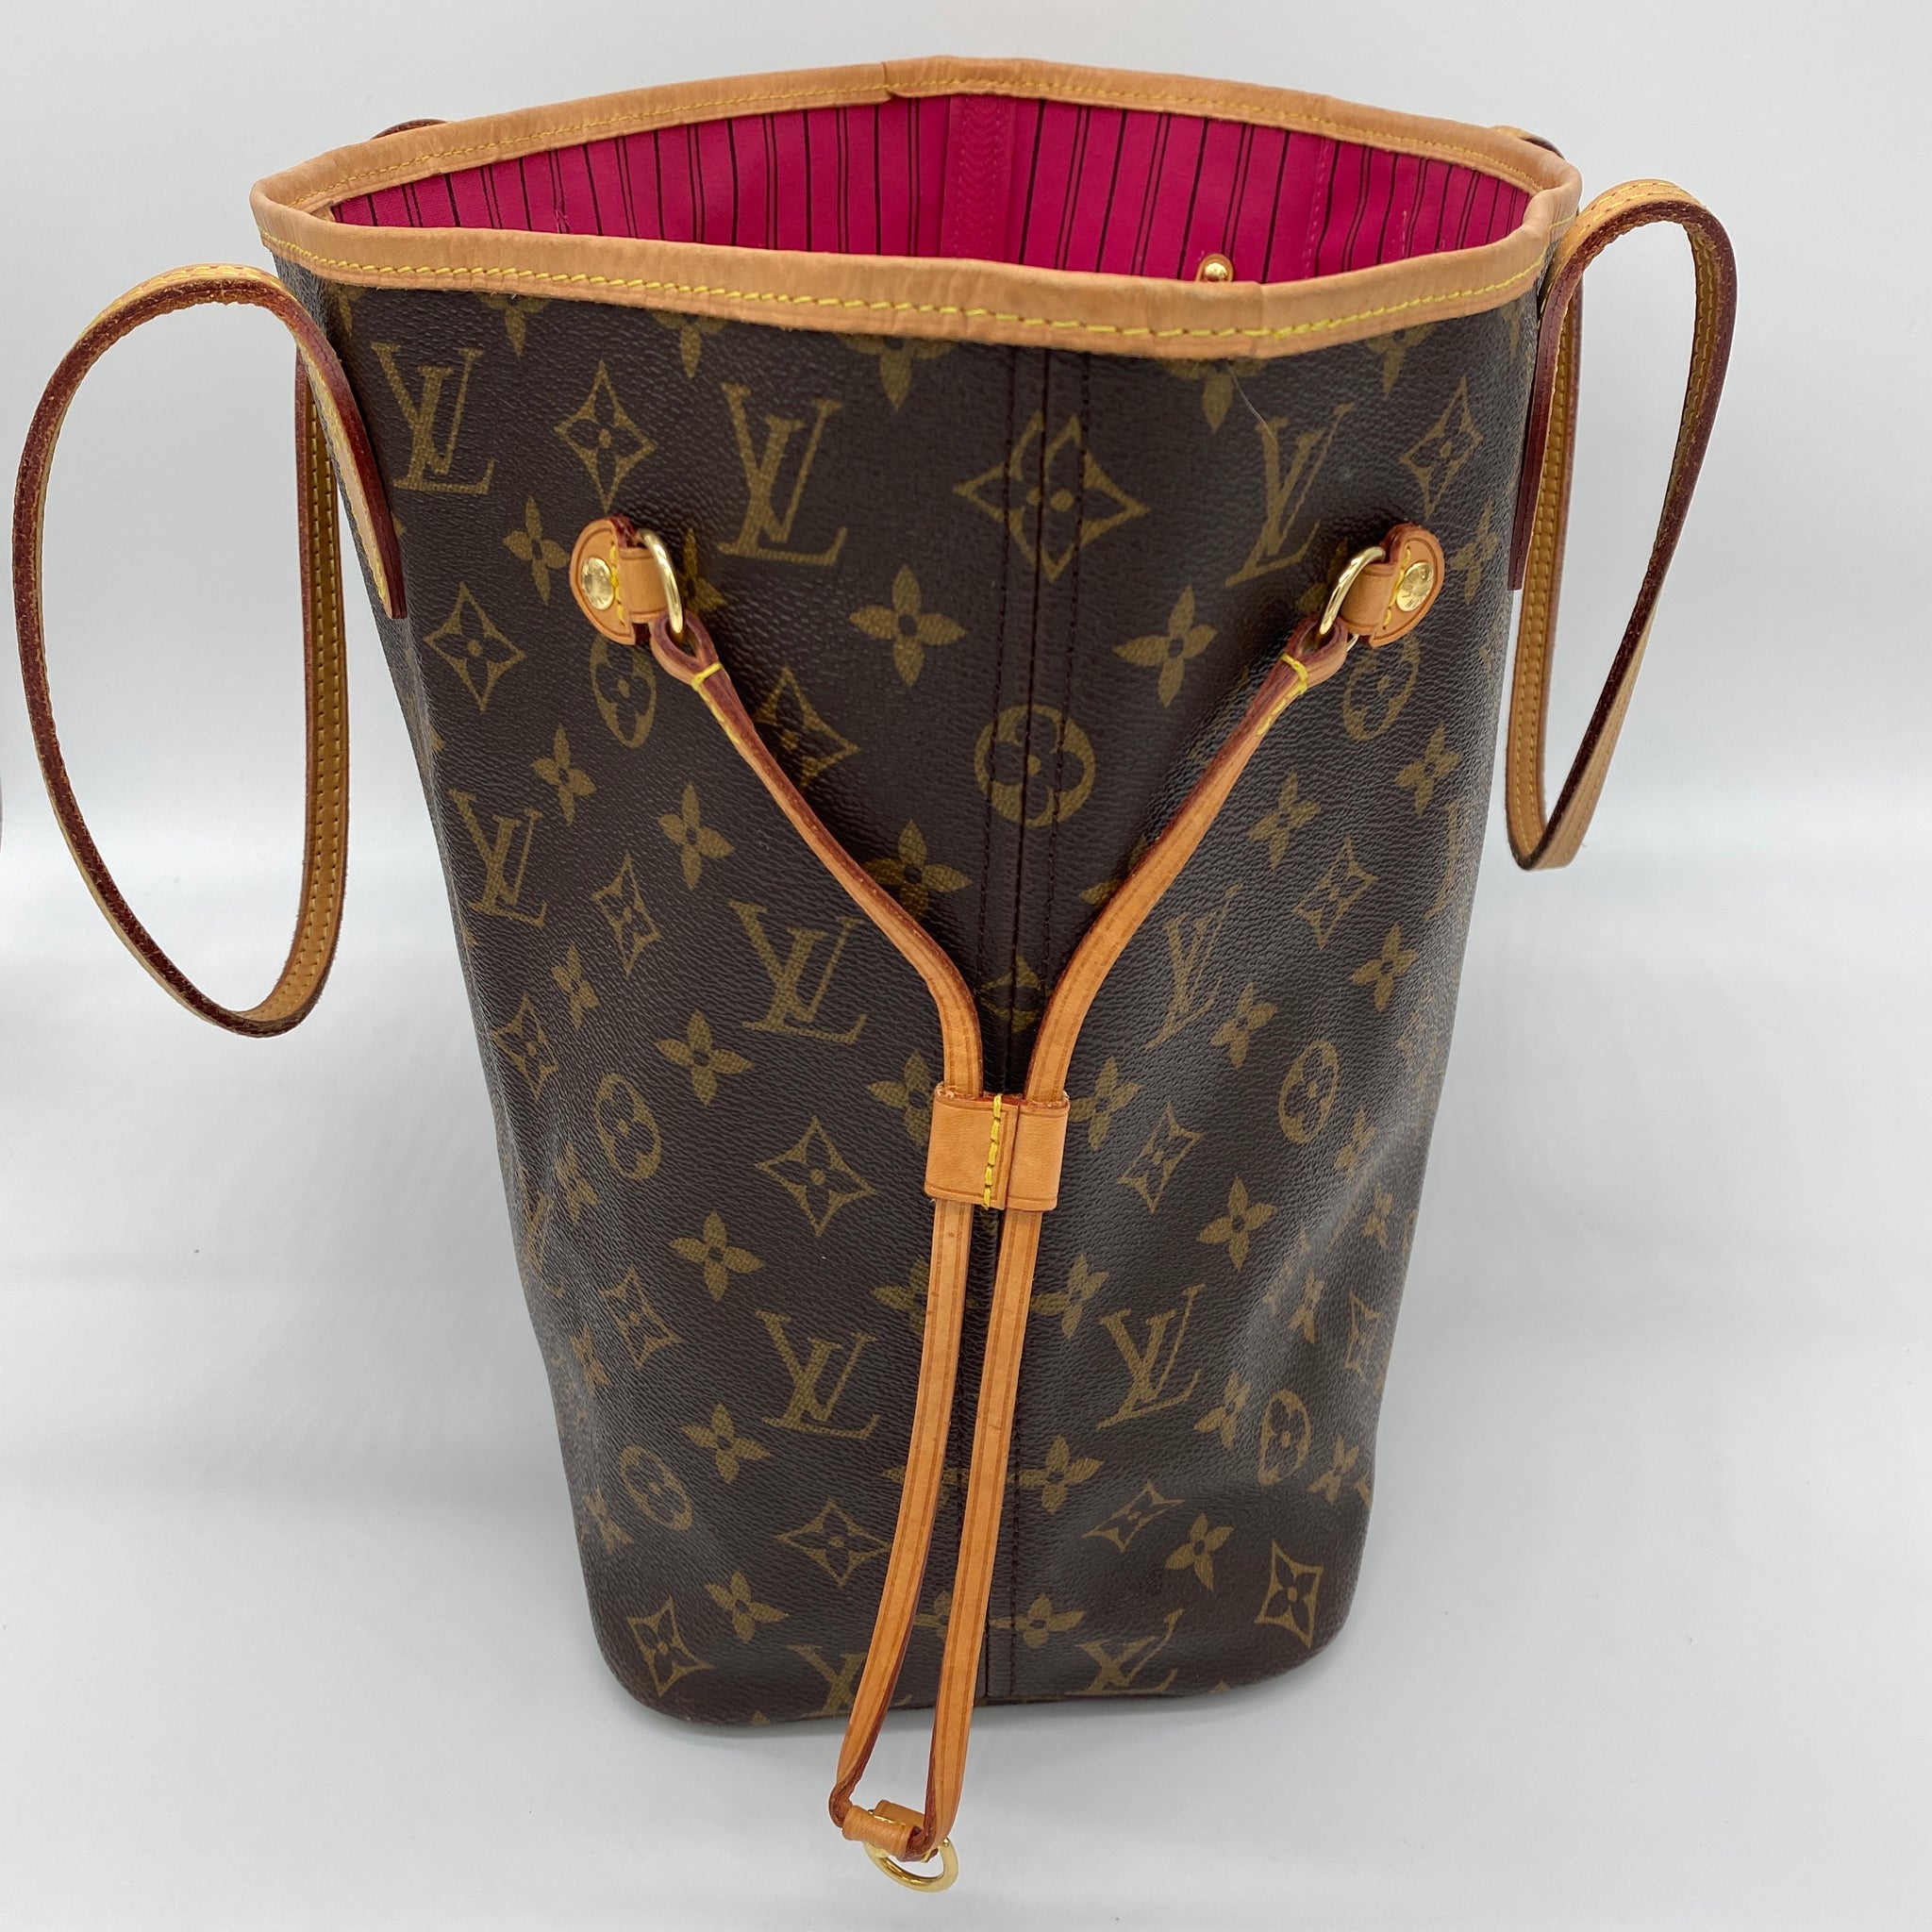 Louis Vuitton Neverfull MM Monogram in peony interior color Rp